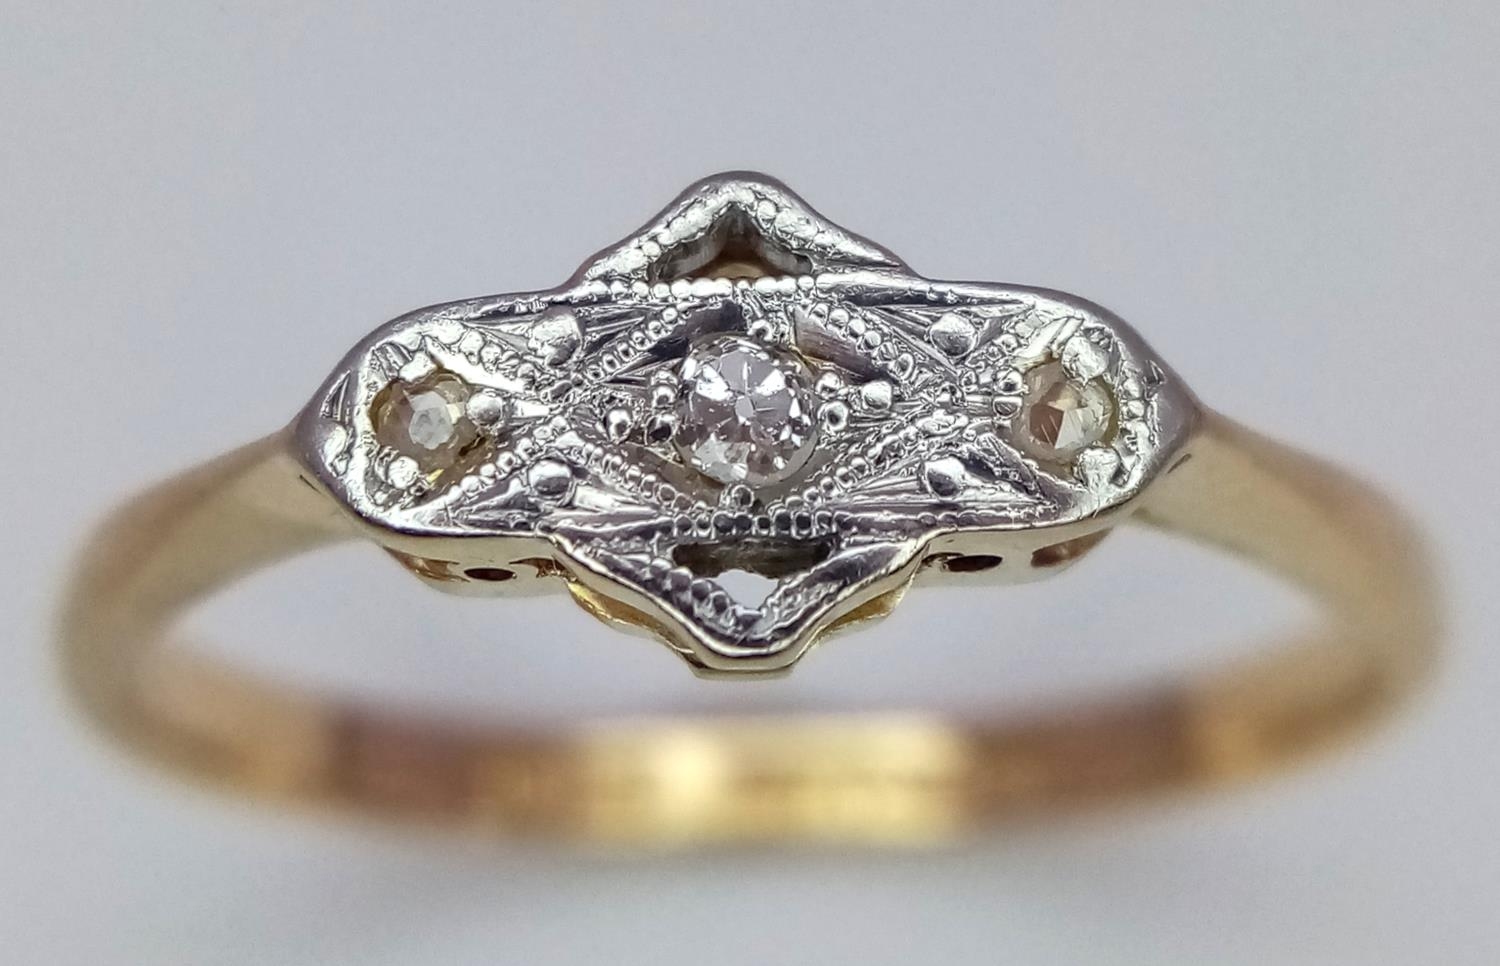 AN 18K YELLOW GOLD & PLATINUM VINTAGE DIAMOND RING. Size O, 2.2g total weight. Ref: SC 9042 - Image 2 of 4